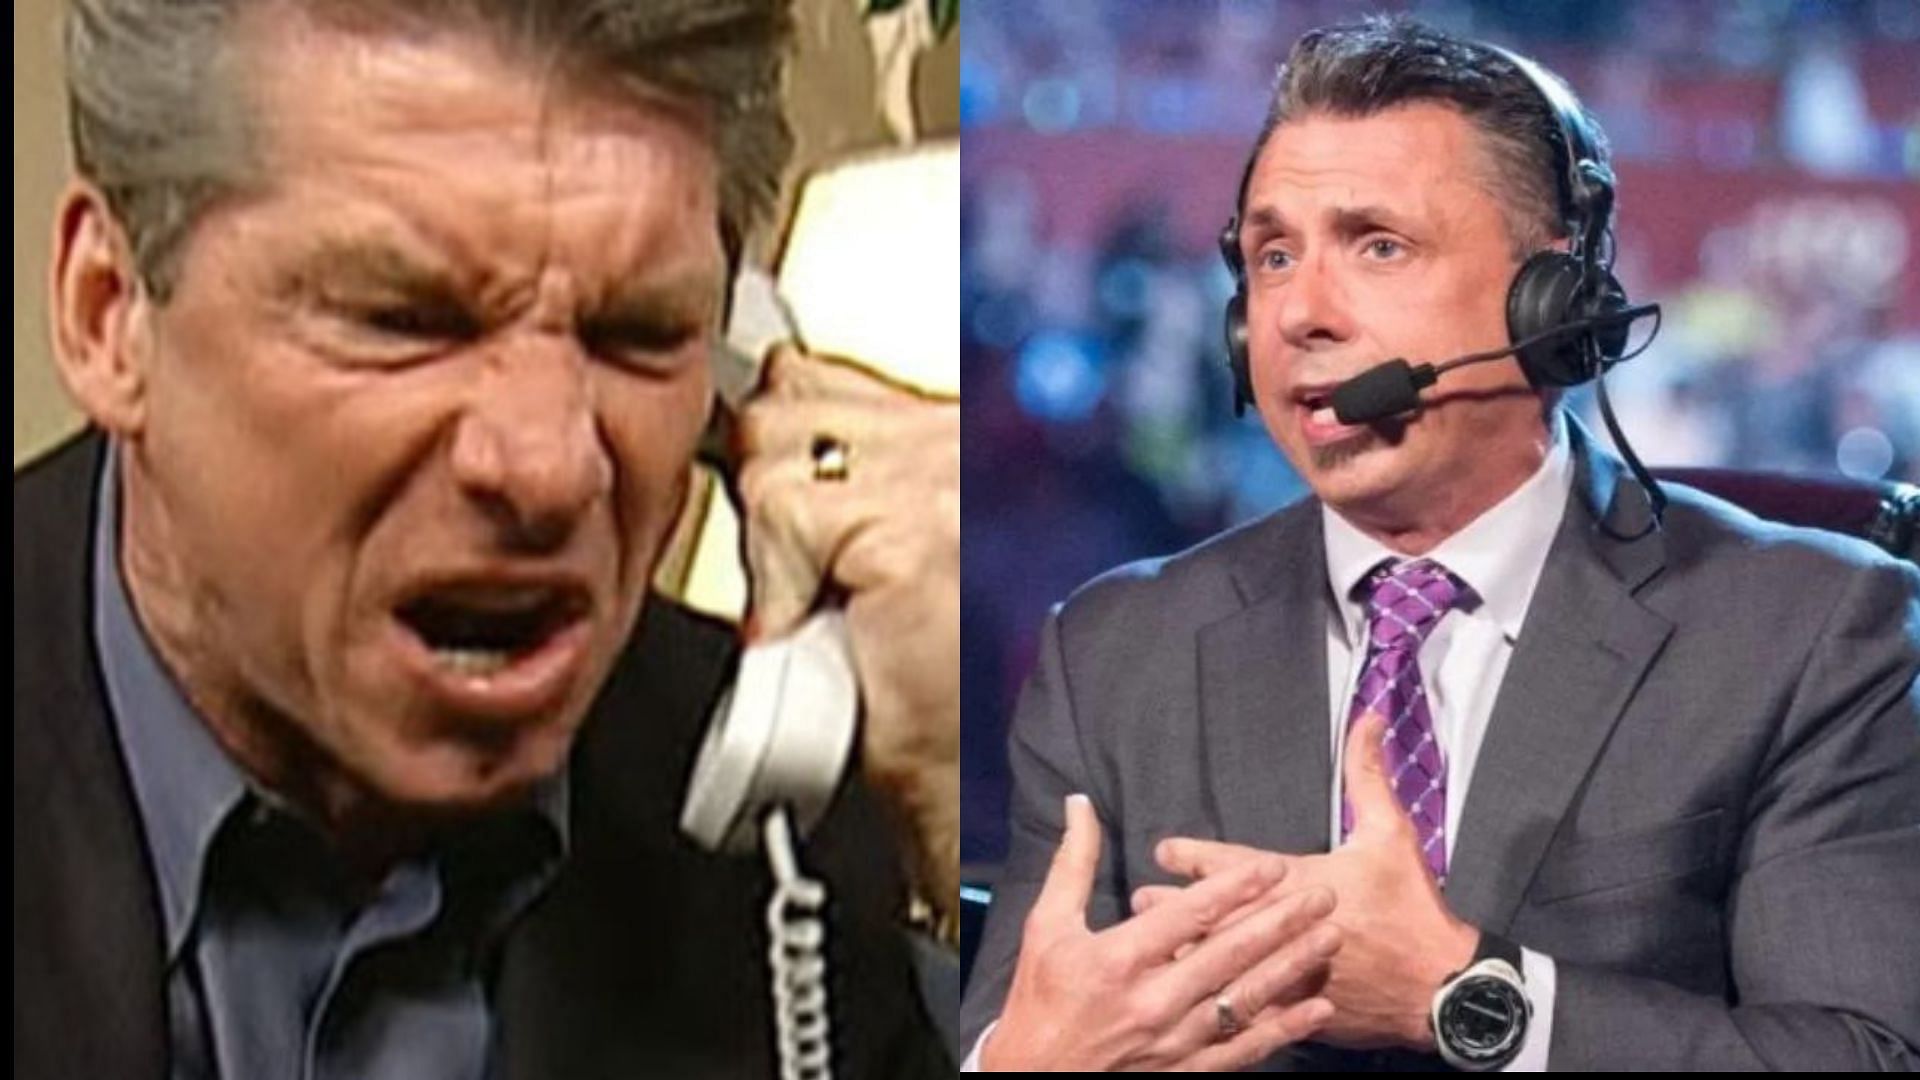 Vince McMahon and Michael Cole are both part of WWE